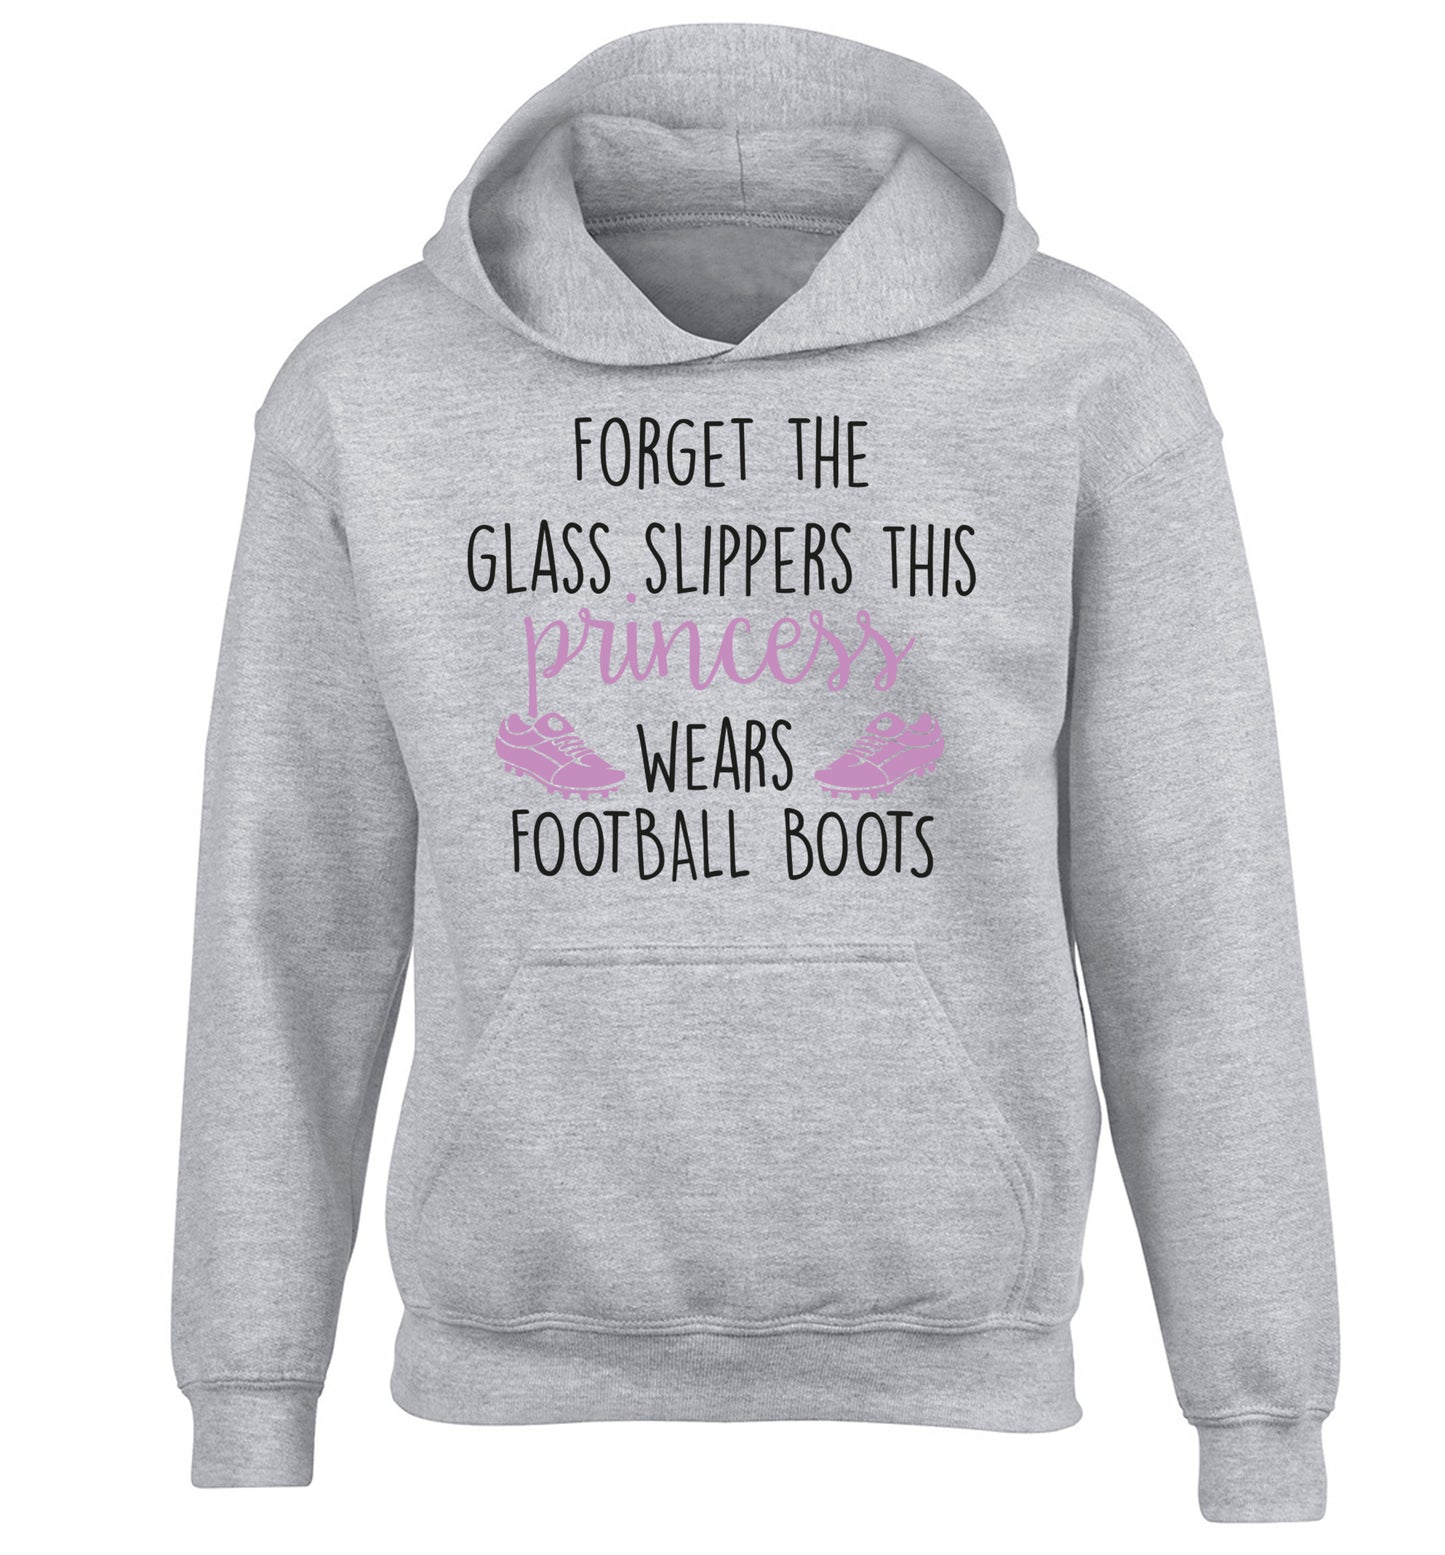 Forget the glass slippers this princess wears football boots children's grey hoodie 12-14 Years